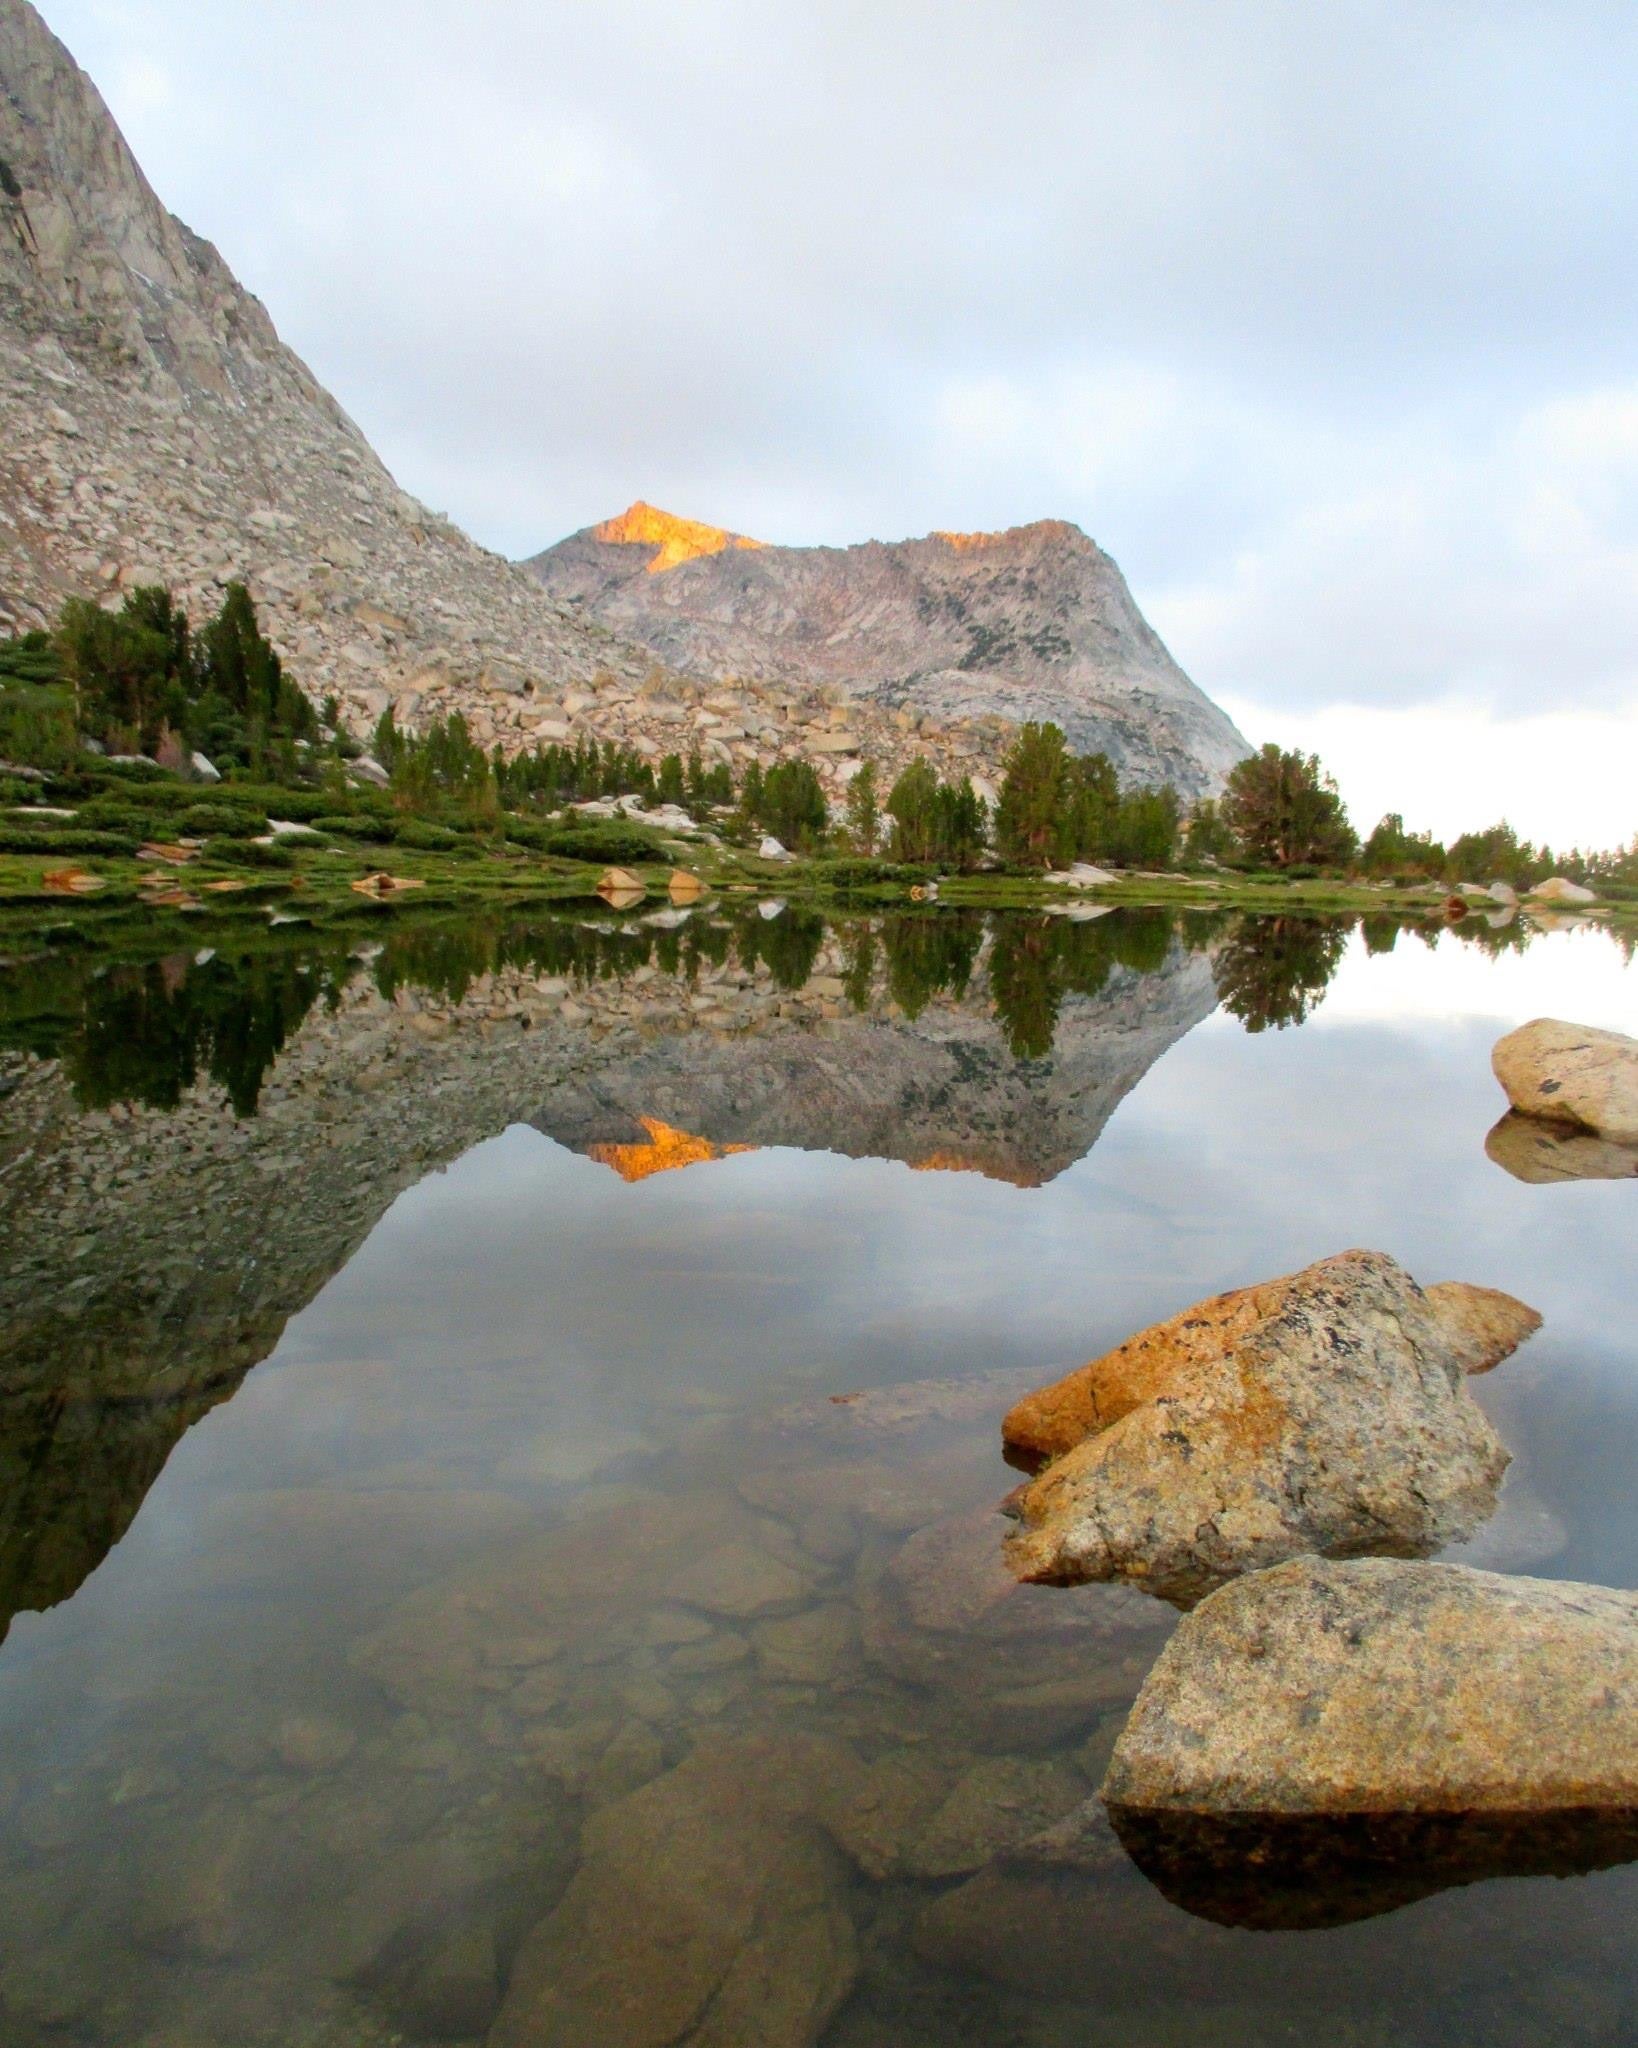 Camper submitted image from Vogelsang High Sierra Camp — Yosemite National Park - 3